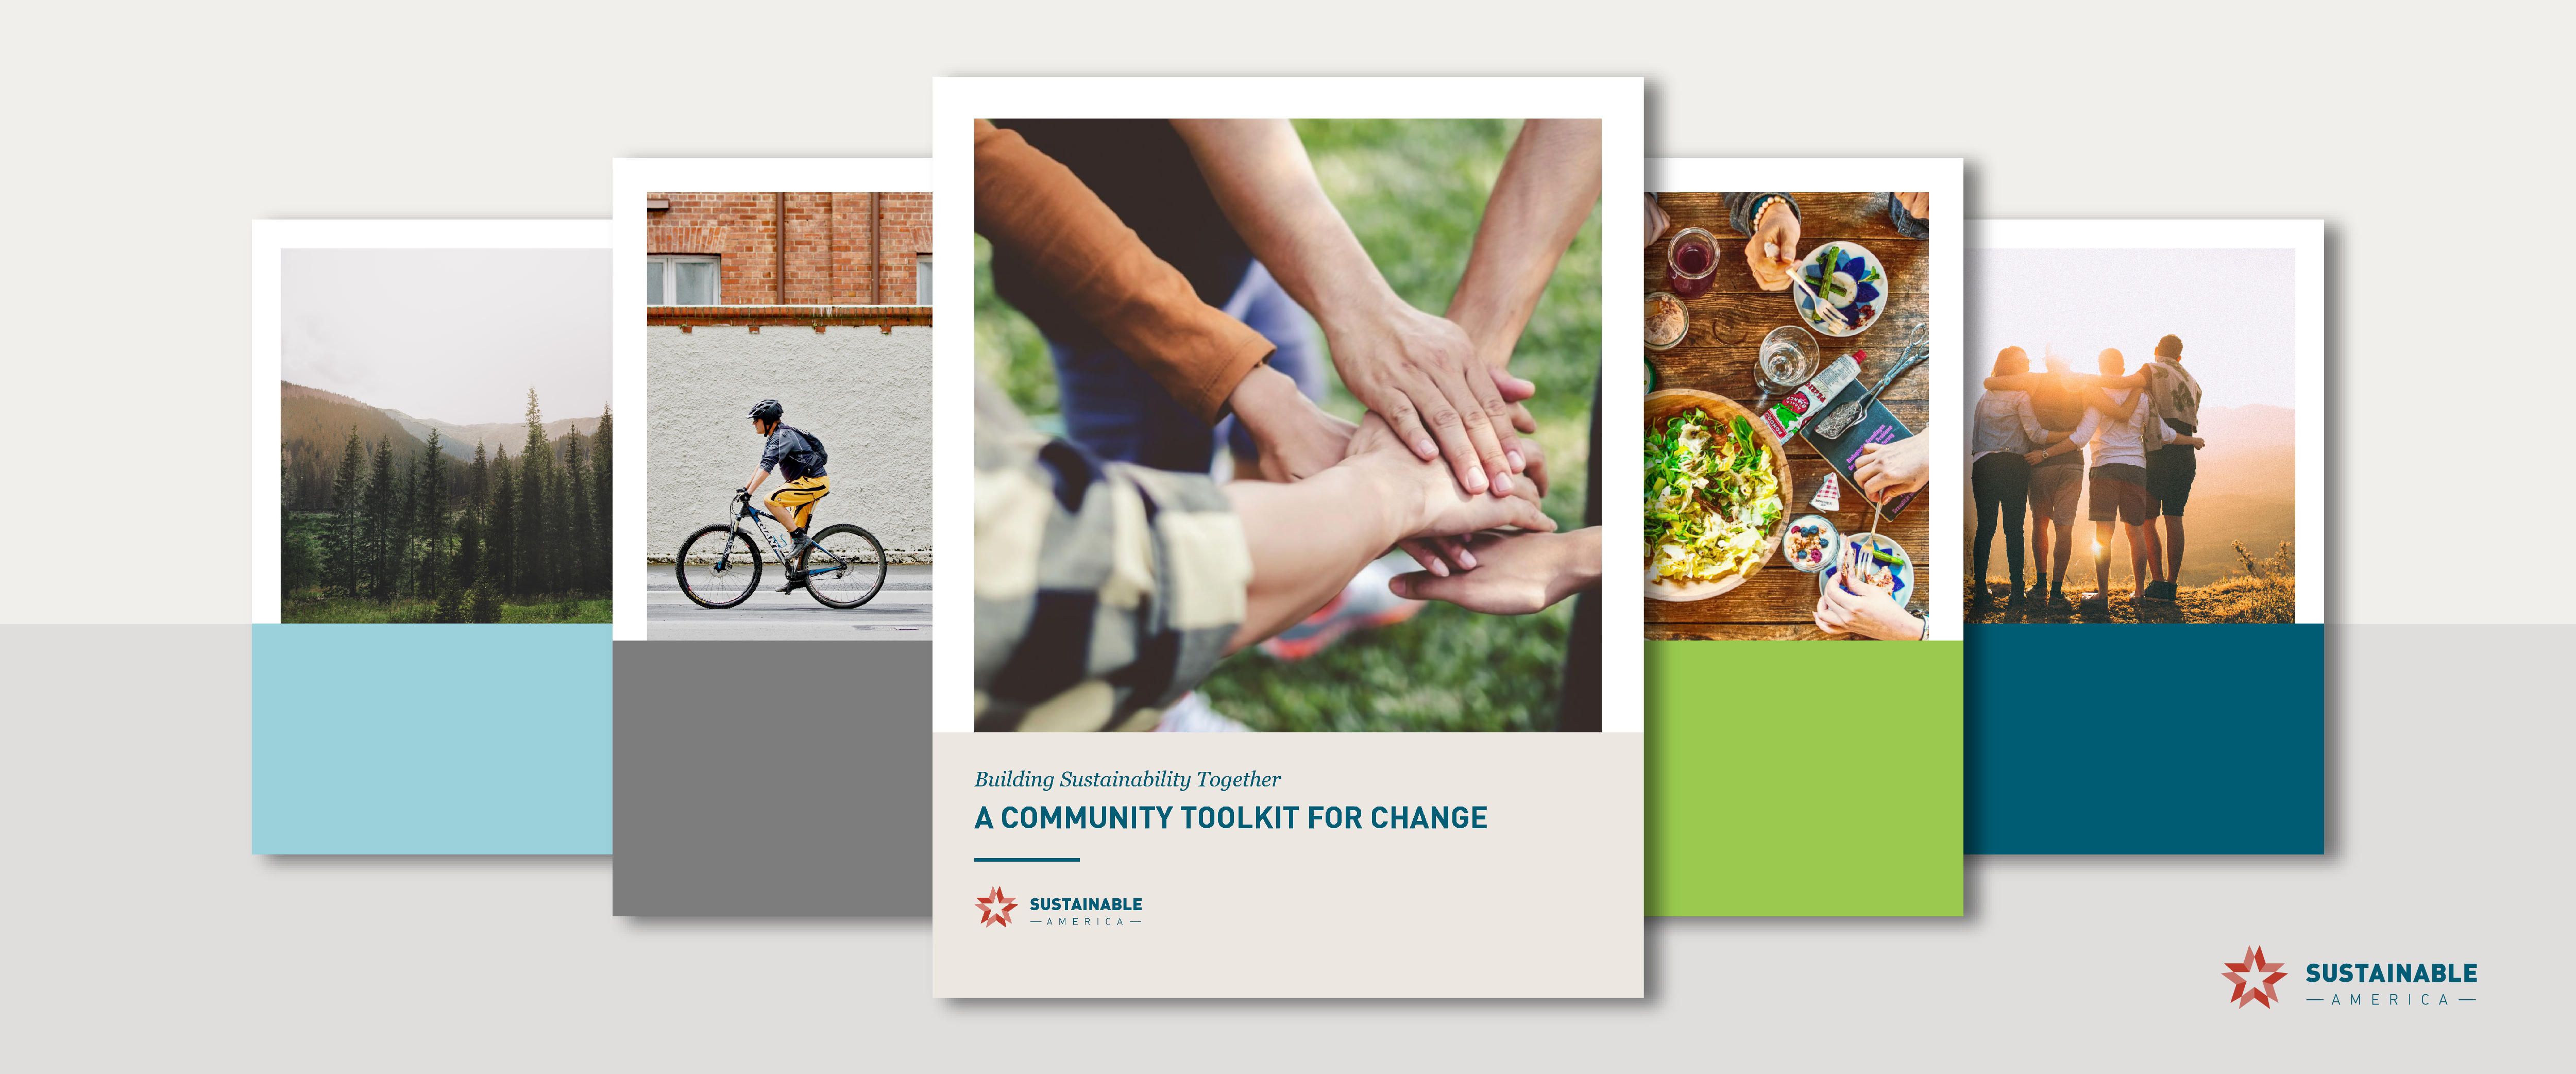 A New Toolkit for Community Change